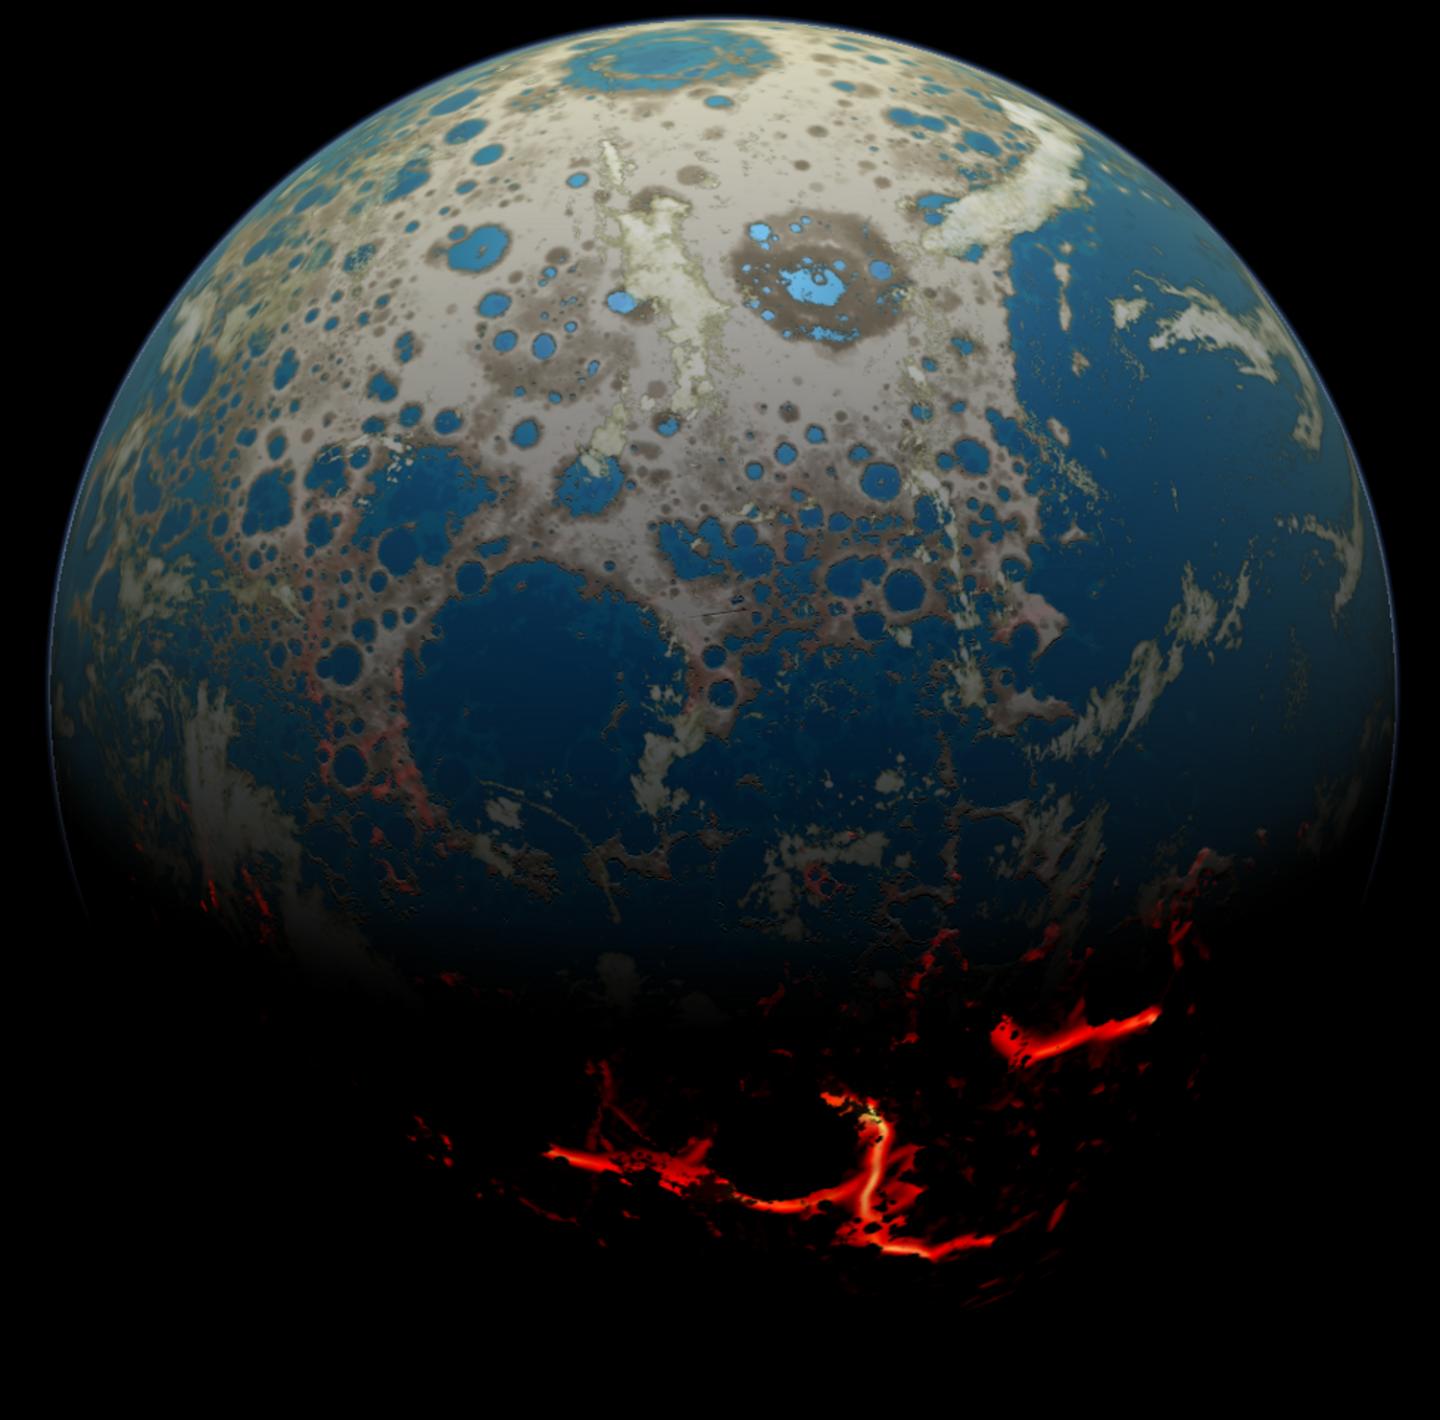 An artist's conception of the early Earth